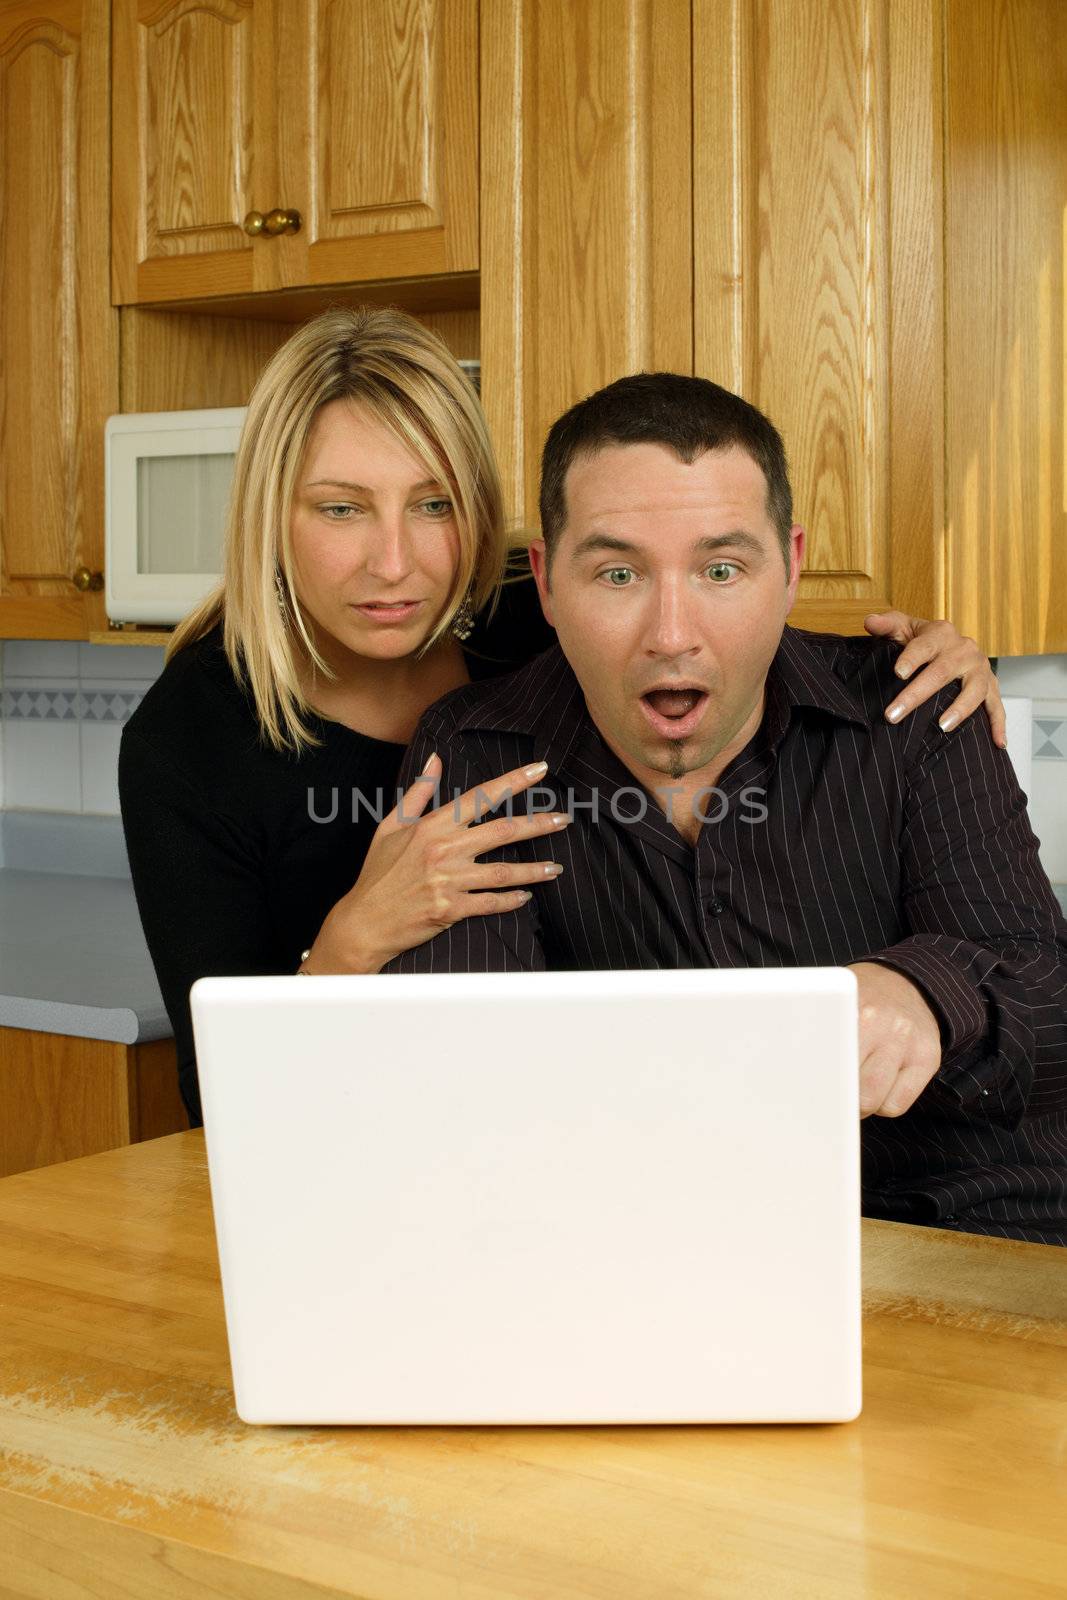 A loving couple, searching the internet on their laptop in their kitchen, and discovering something shocking.
